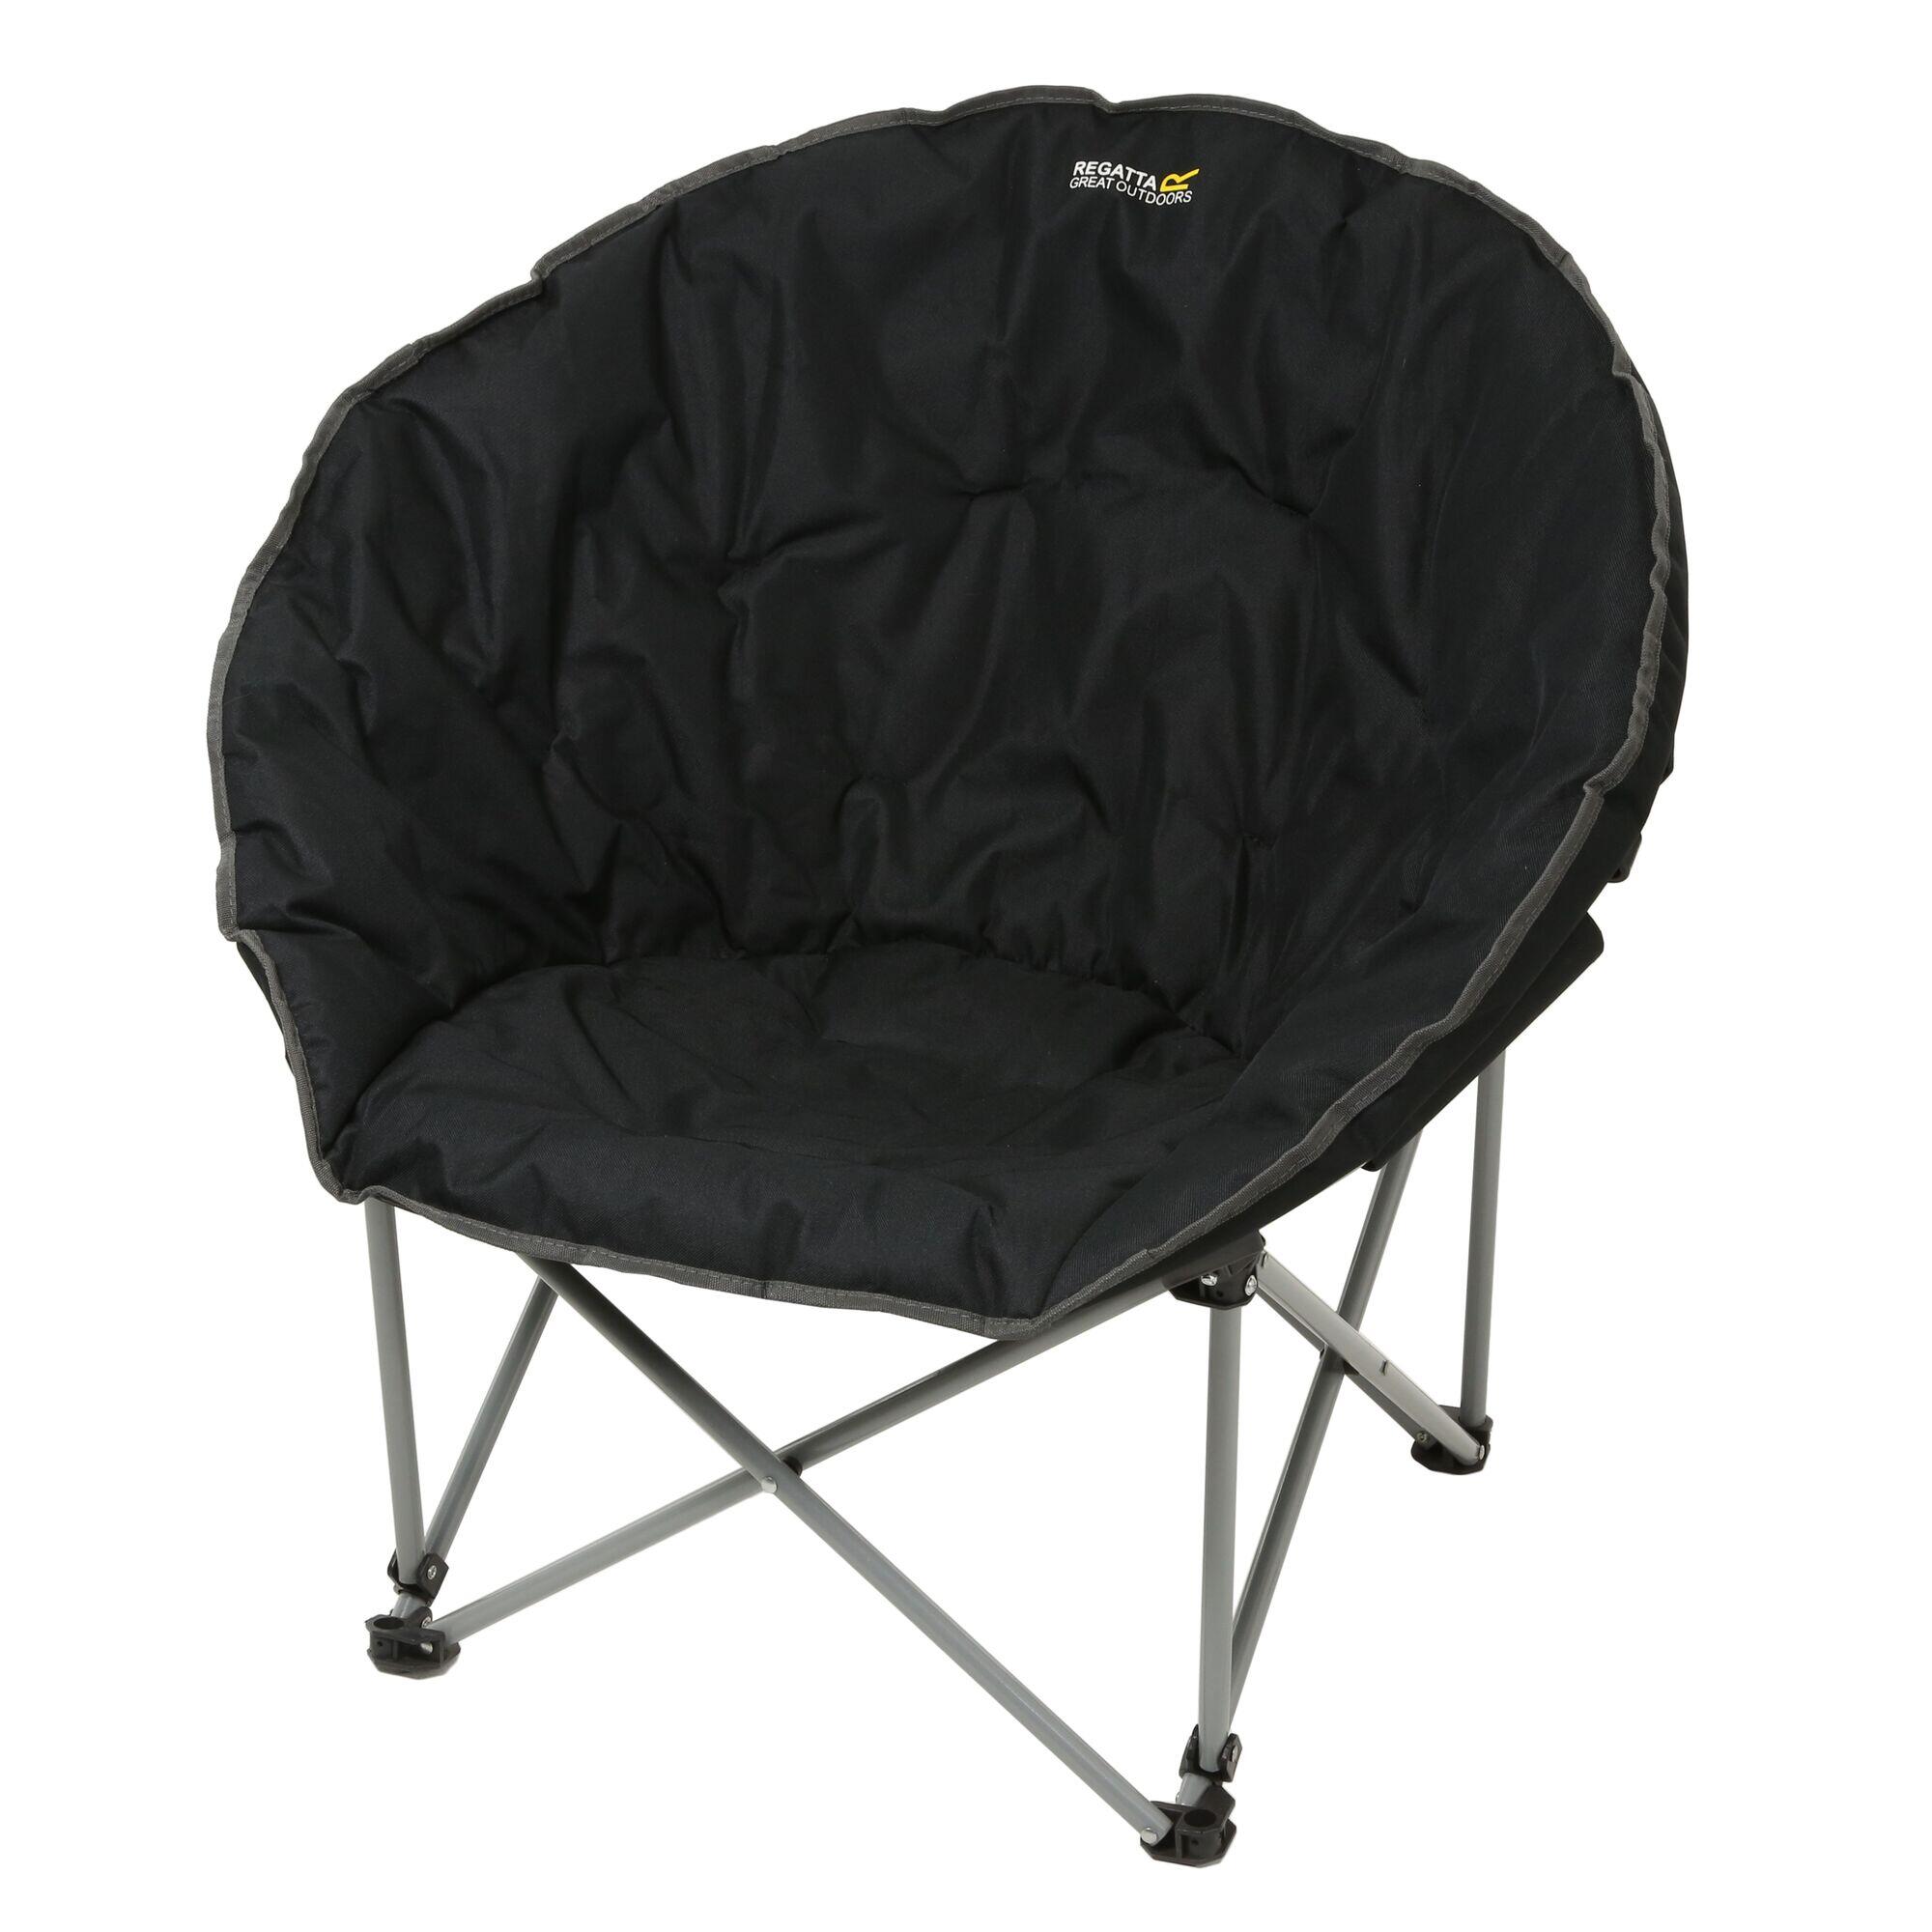 Castillo Adults' Camping Chair - Black 1/2